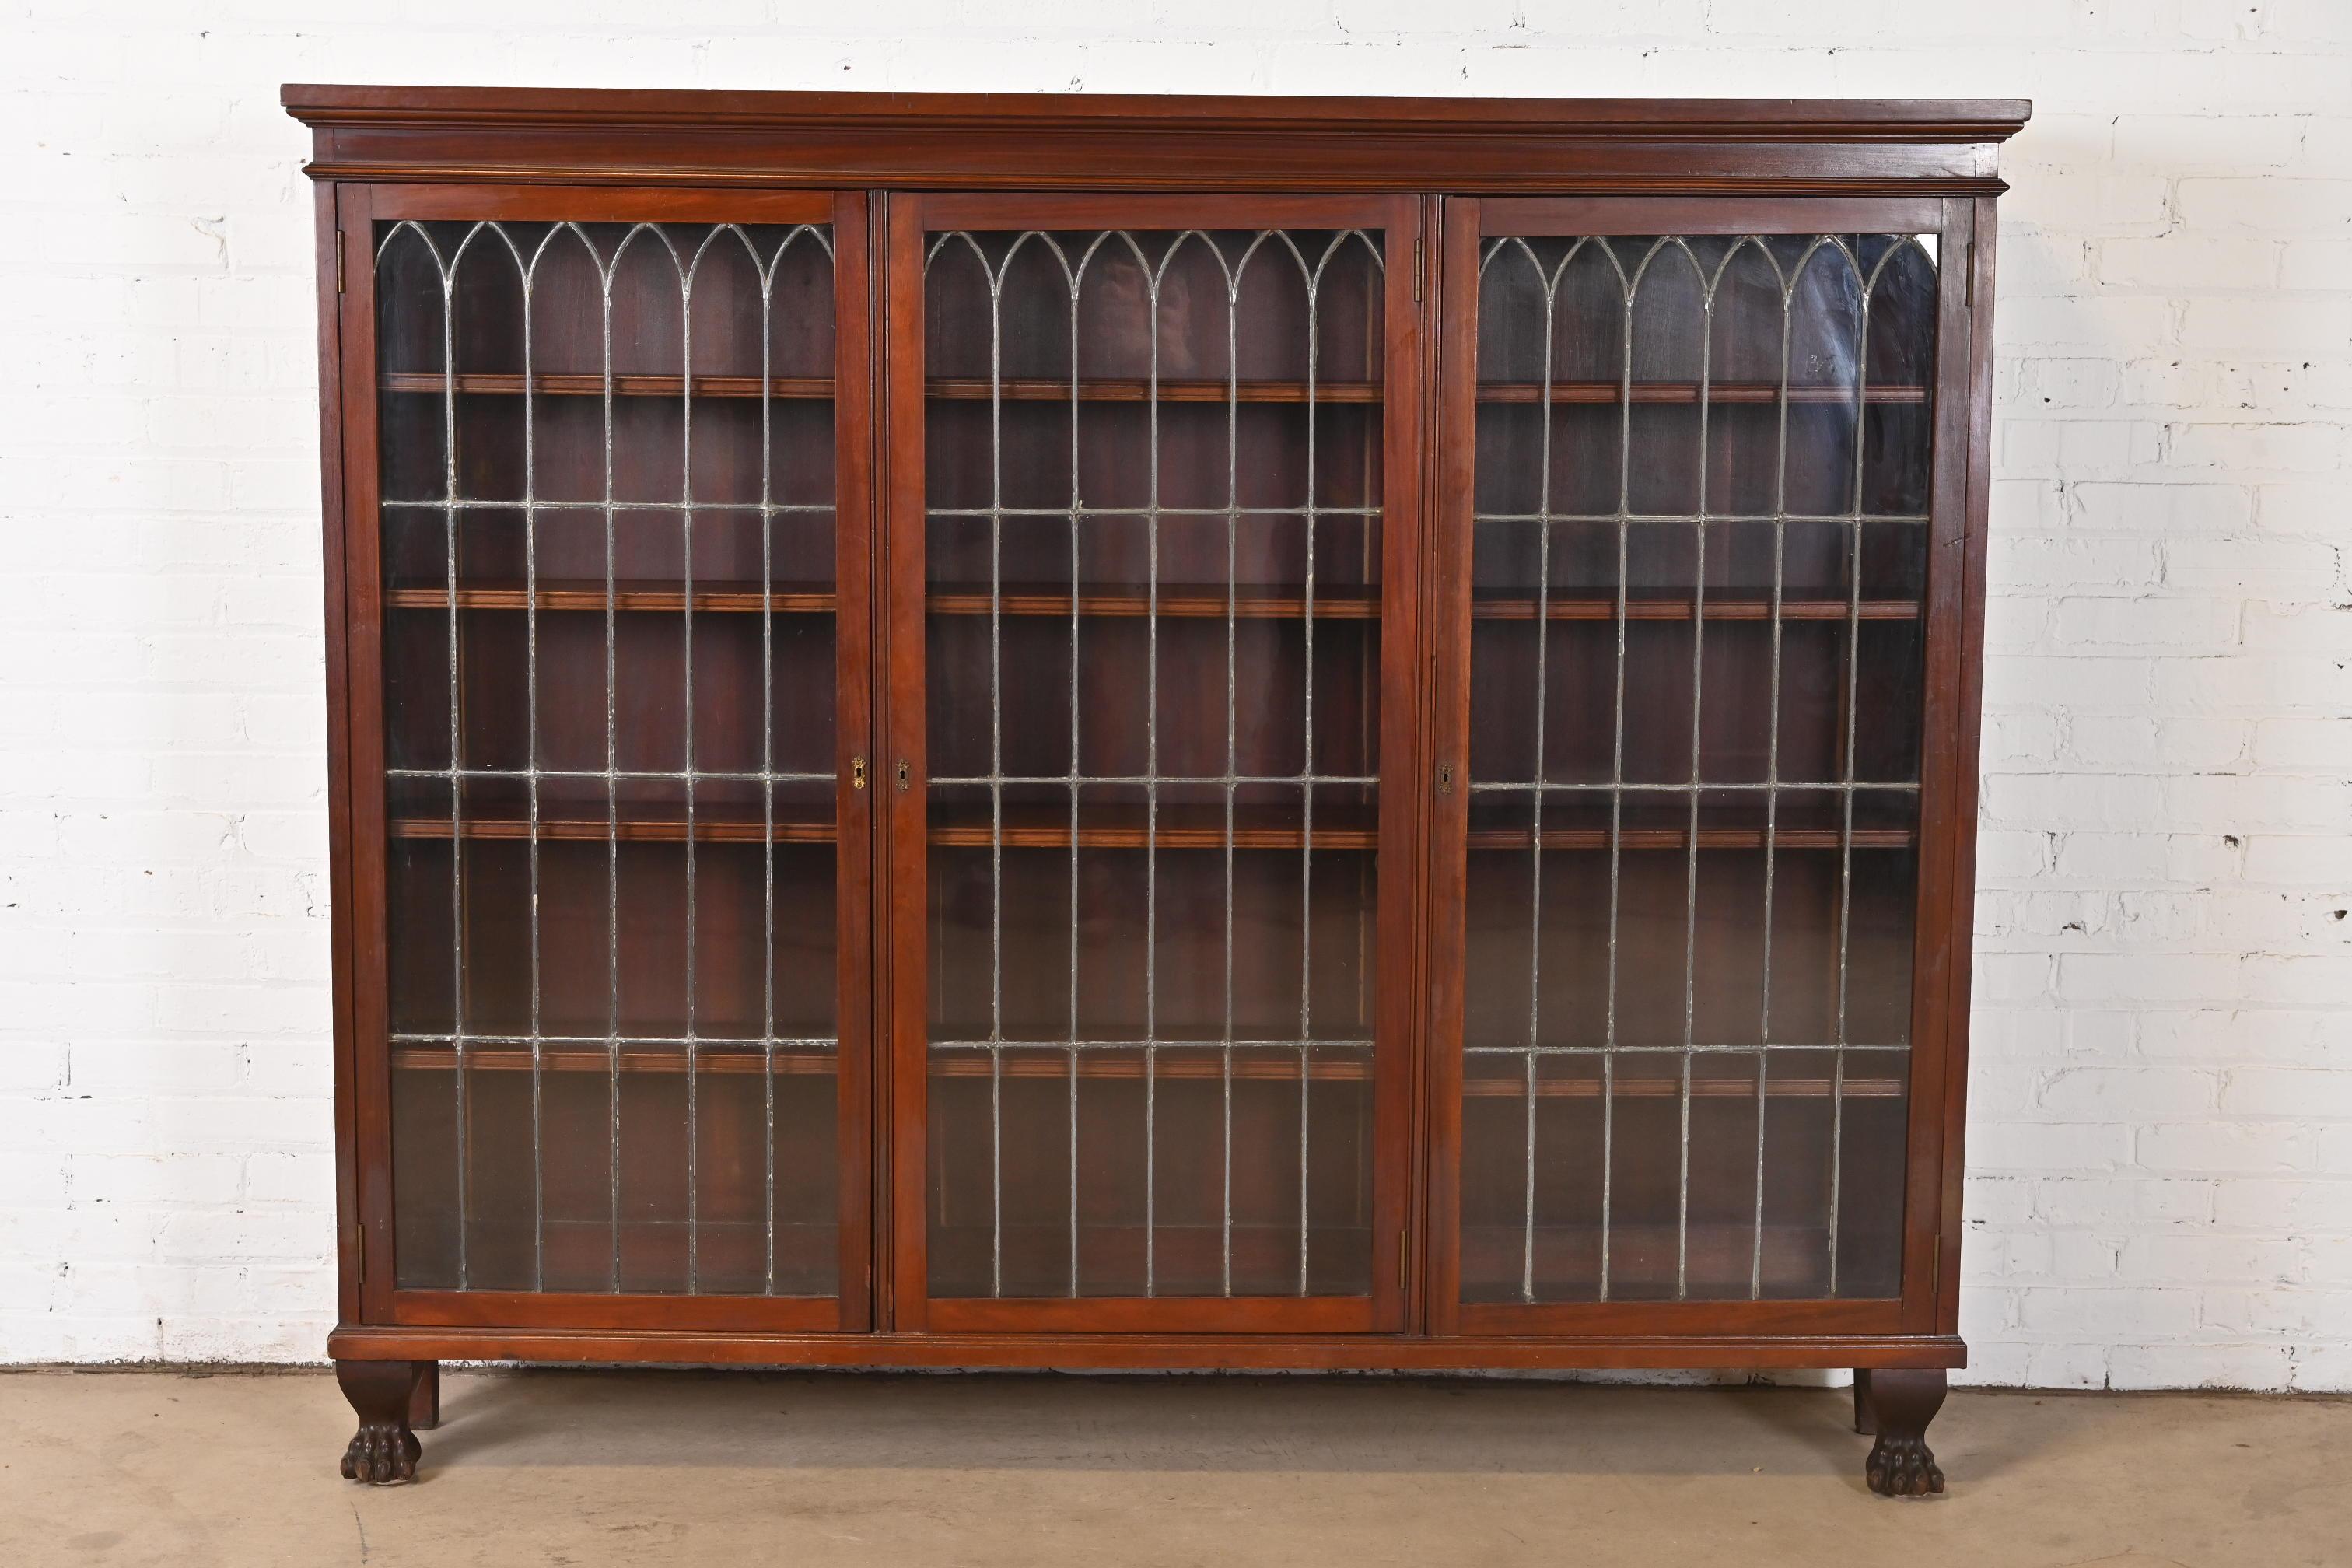 An exceptional antique Late Victorian or Arts & Crafts triple bookcase

In the manner of R.J. Horner

USA, Late 19th Century

Carved mahogany, with original leaded glass doors and brass hardware, and paw feet.

Measures: 71.5